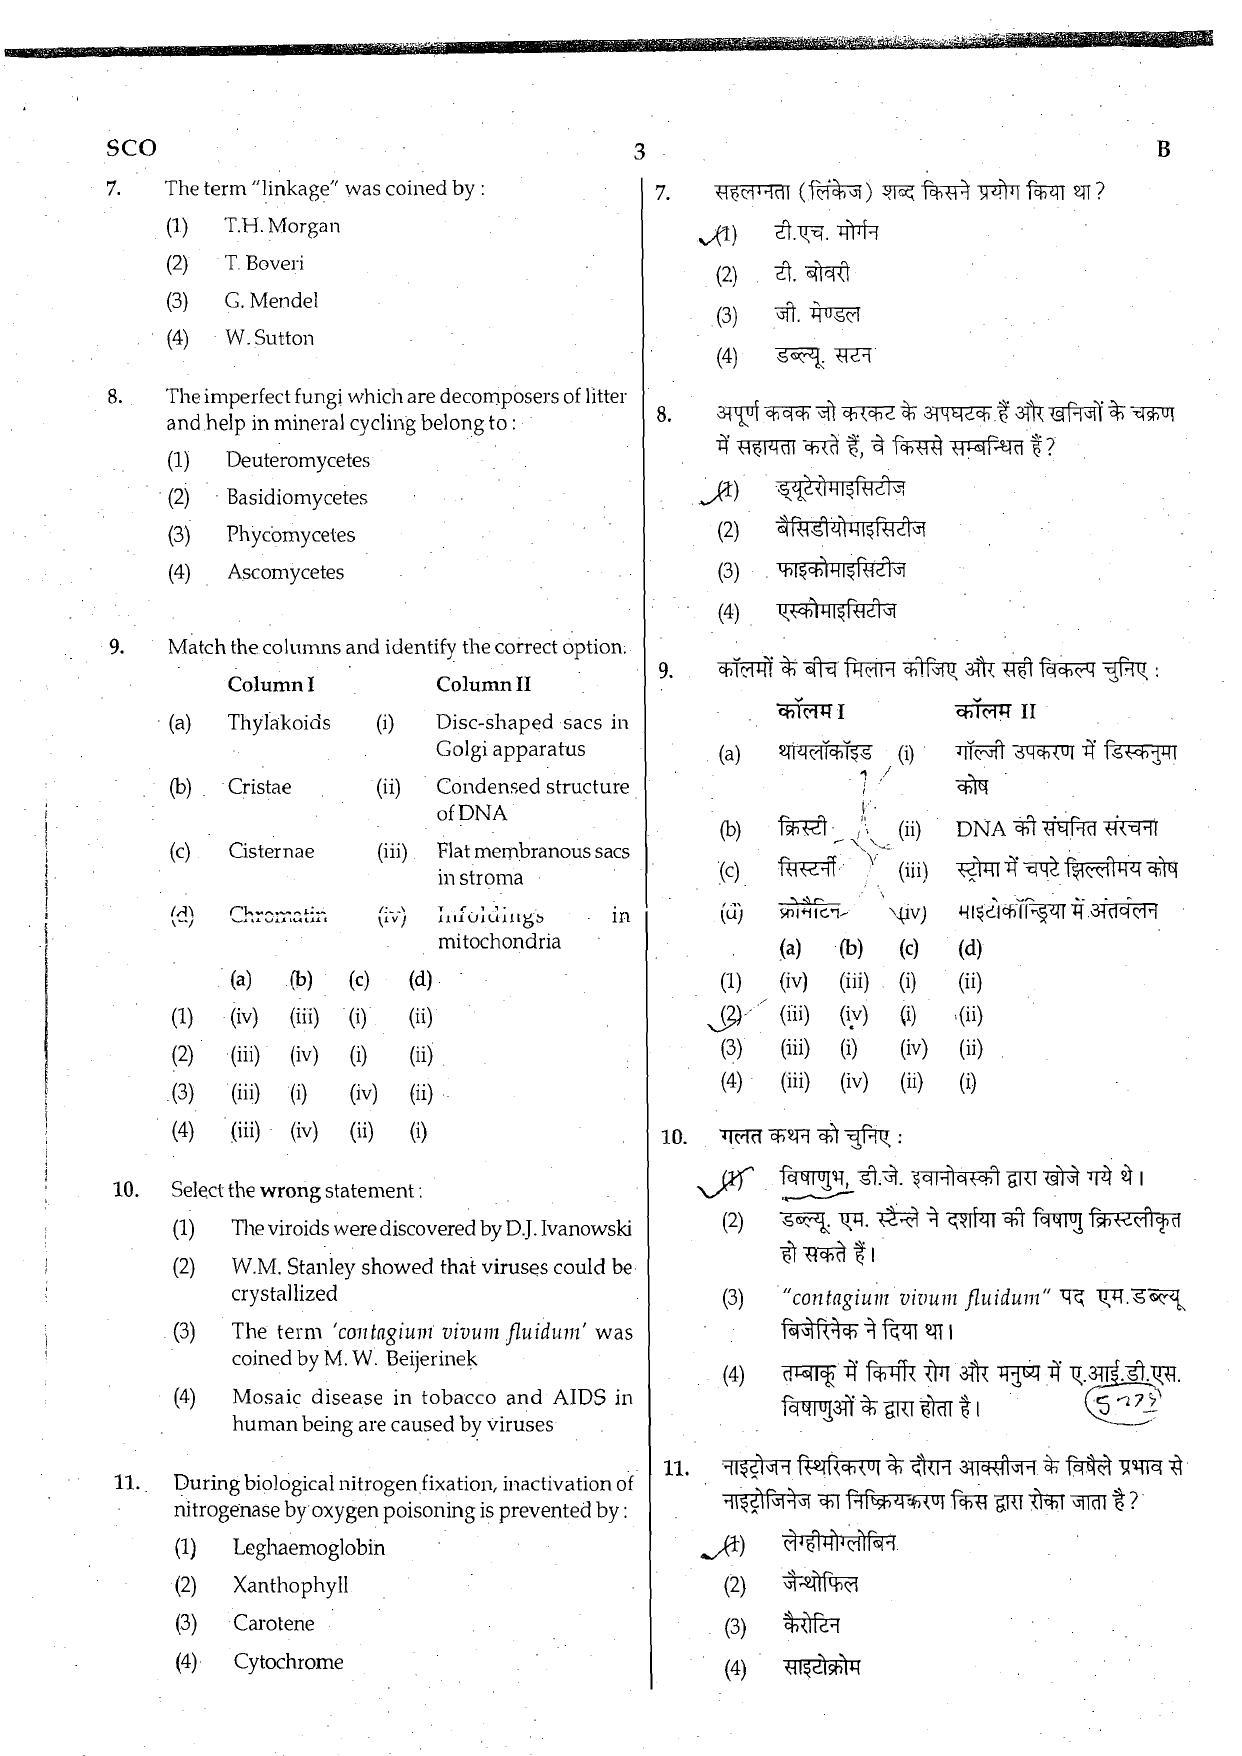 NEET Code B 2015 Question Paper - Page 3